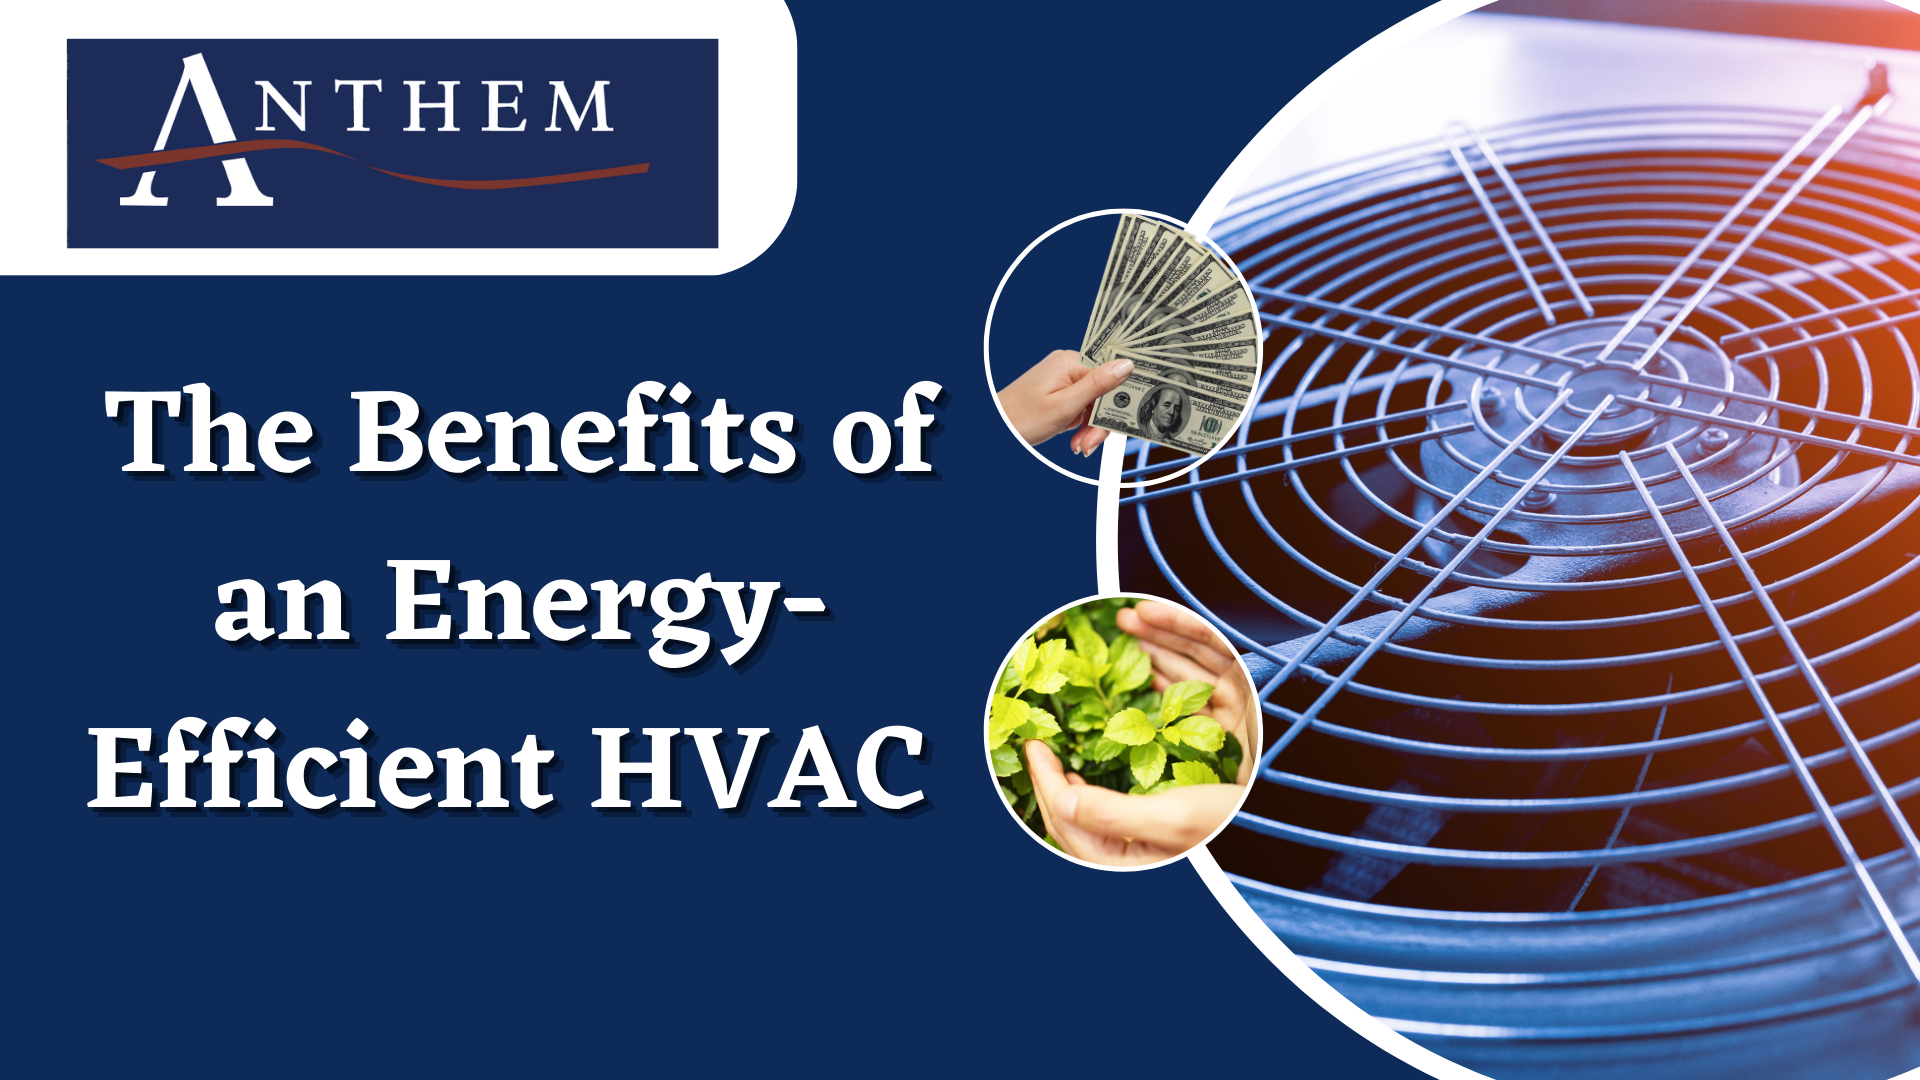 The Benefits of an Energy-Efficient HVAC